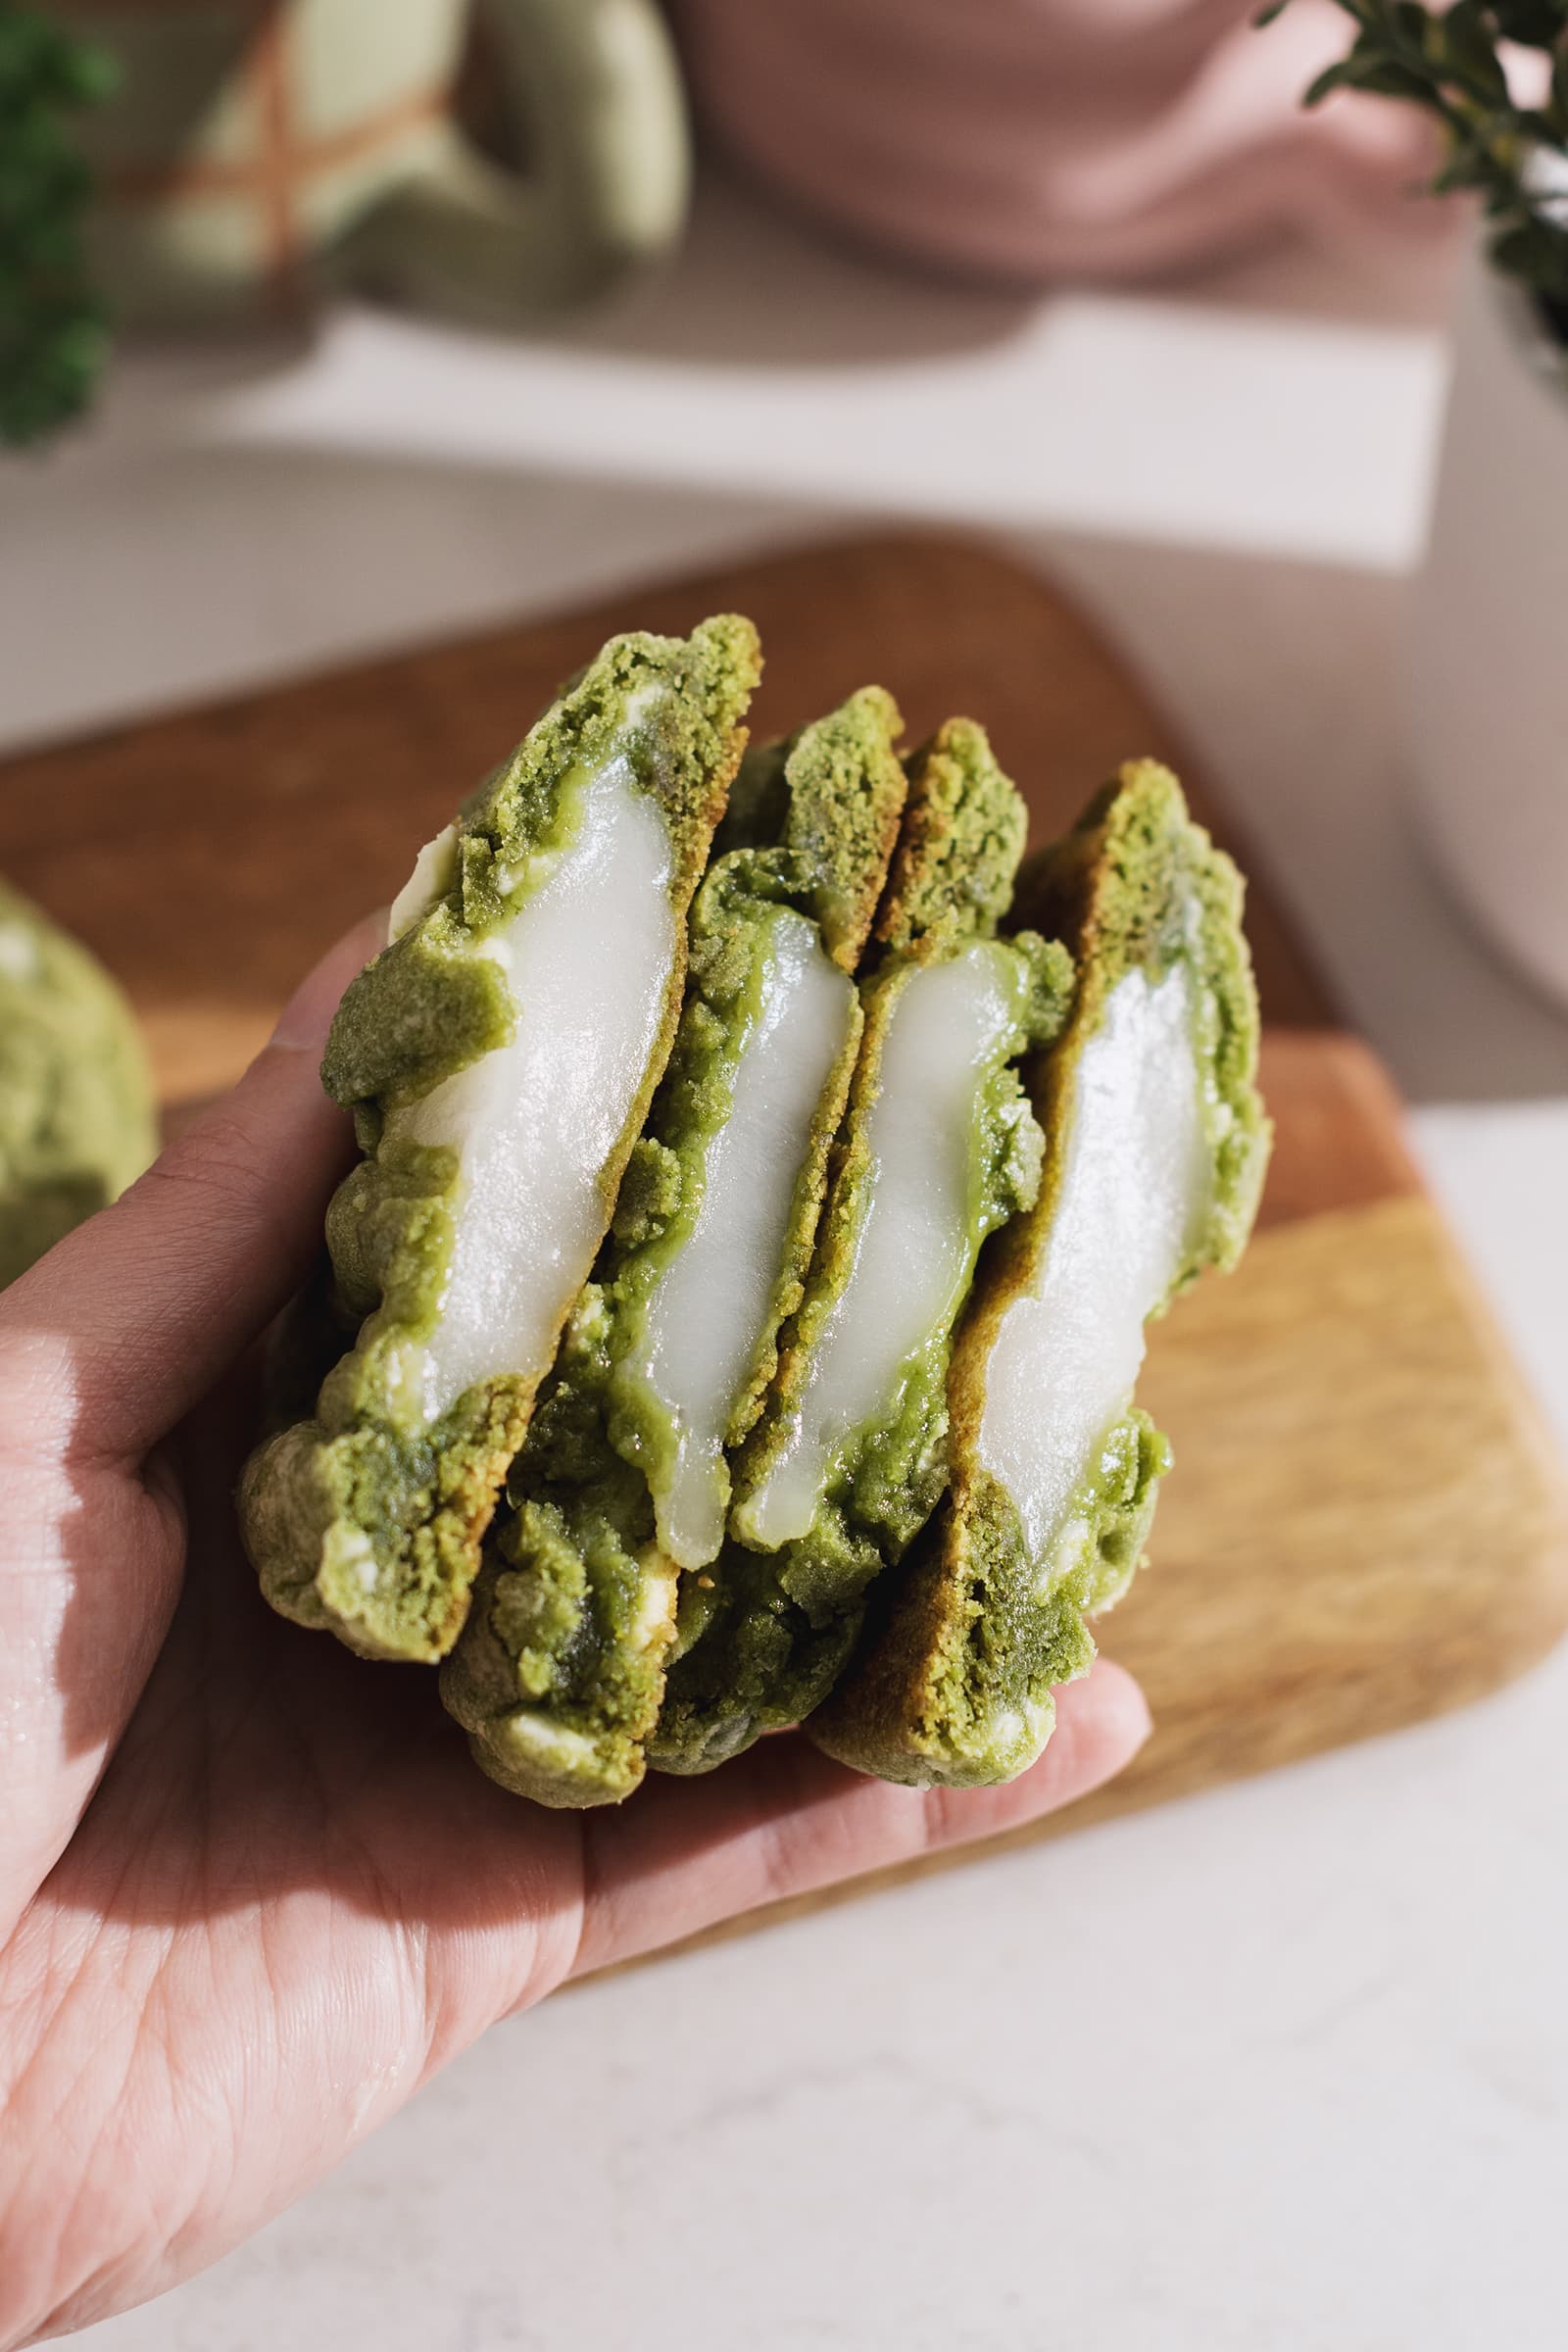 Cross section of matcha cookies cut in half to show the mochi inside.